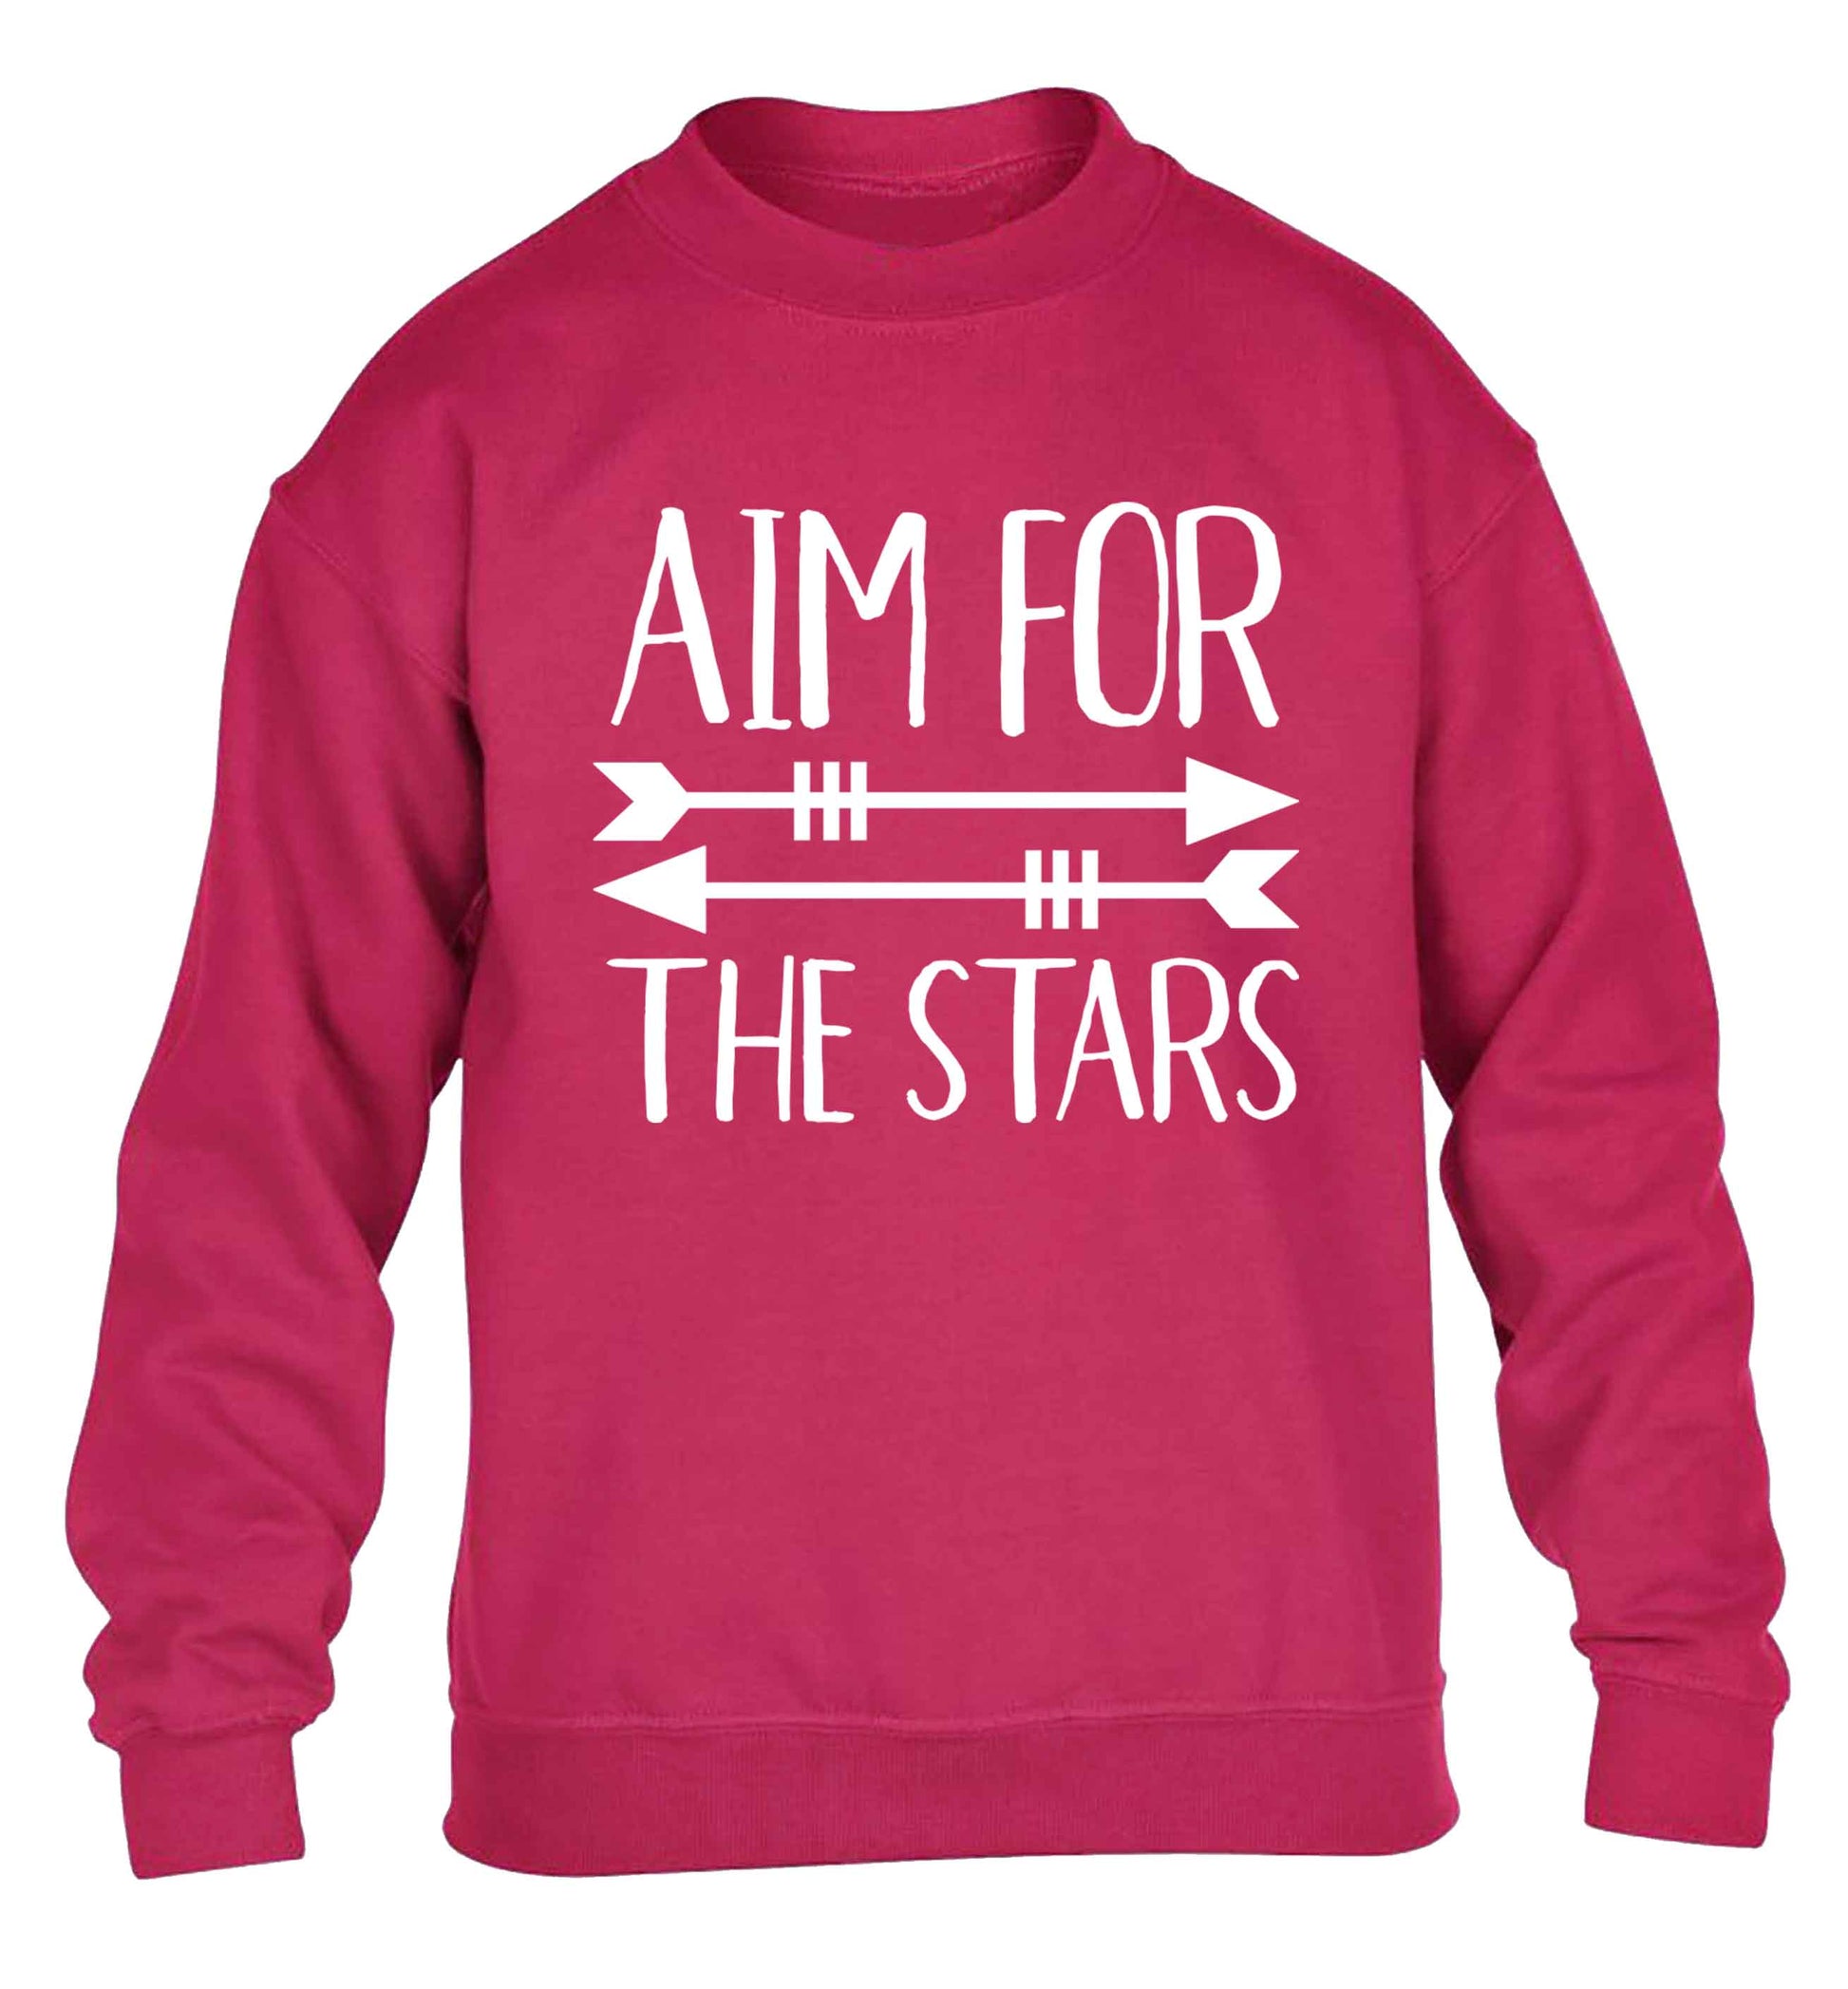 Aim for the stars children's pink sweater 12-13 Years